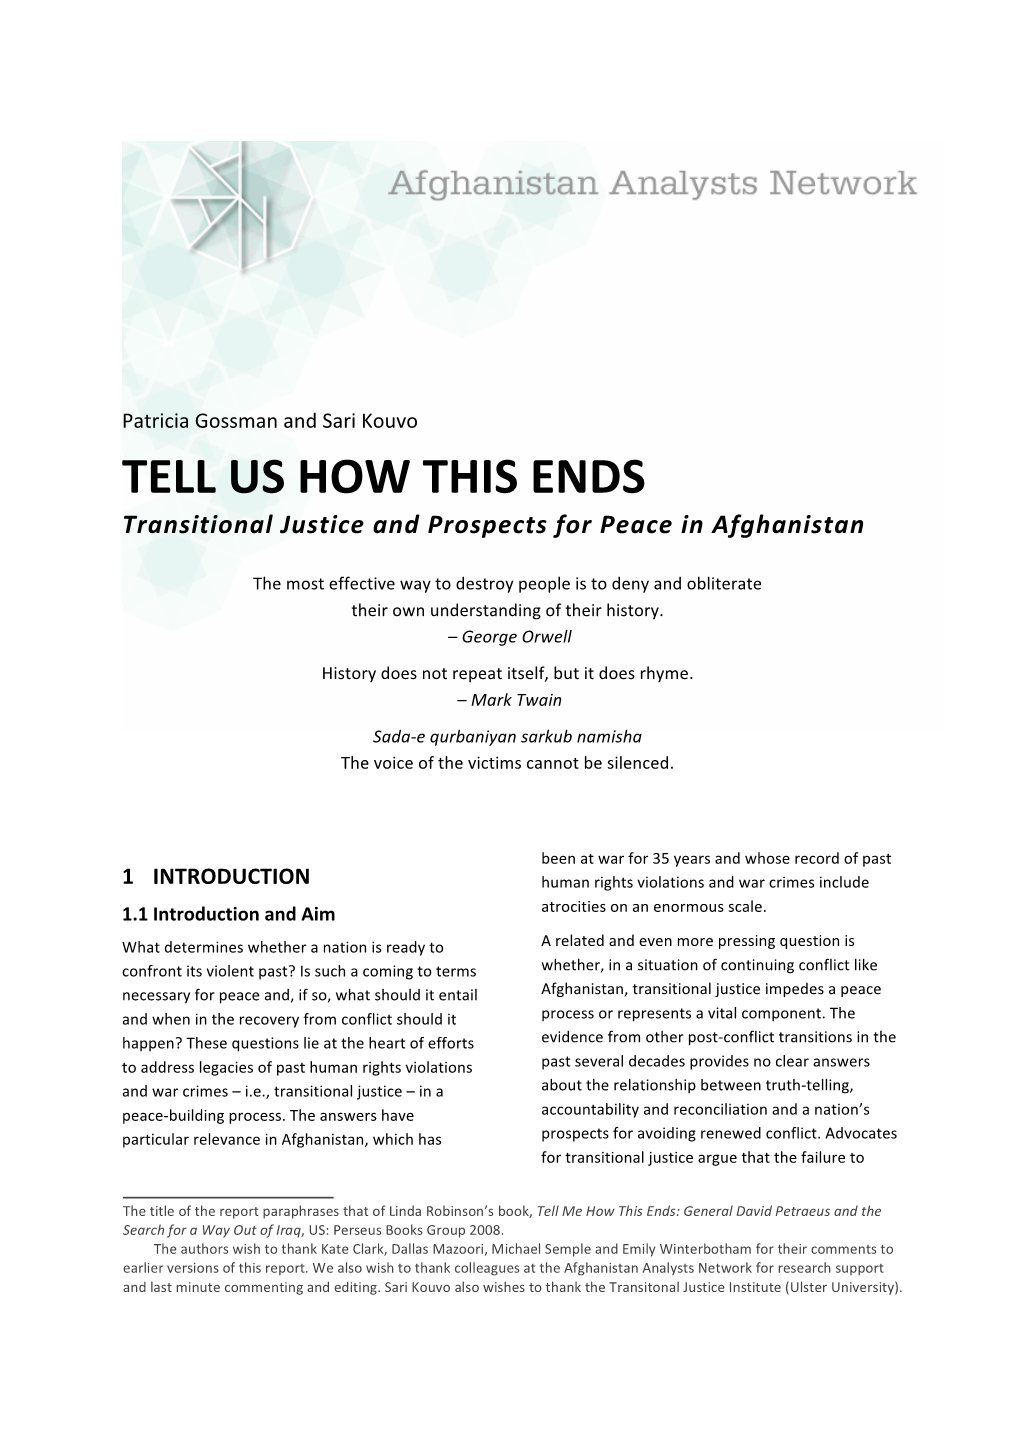 Tell Us How This Ends: Transitional Justice and Prospects for Peace In